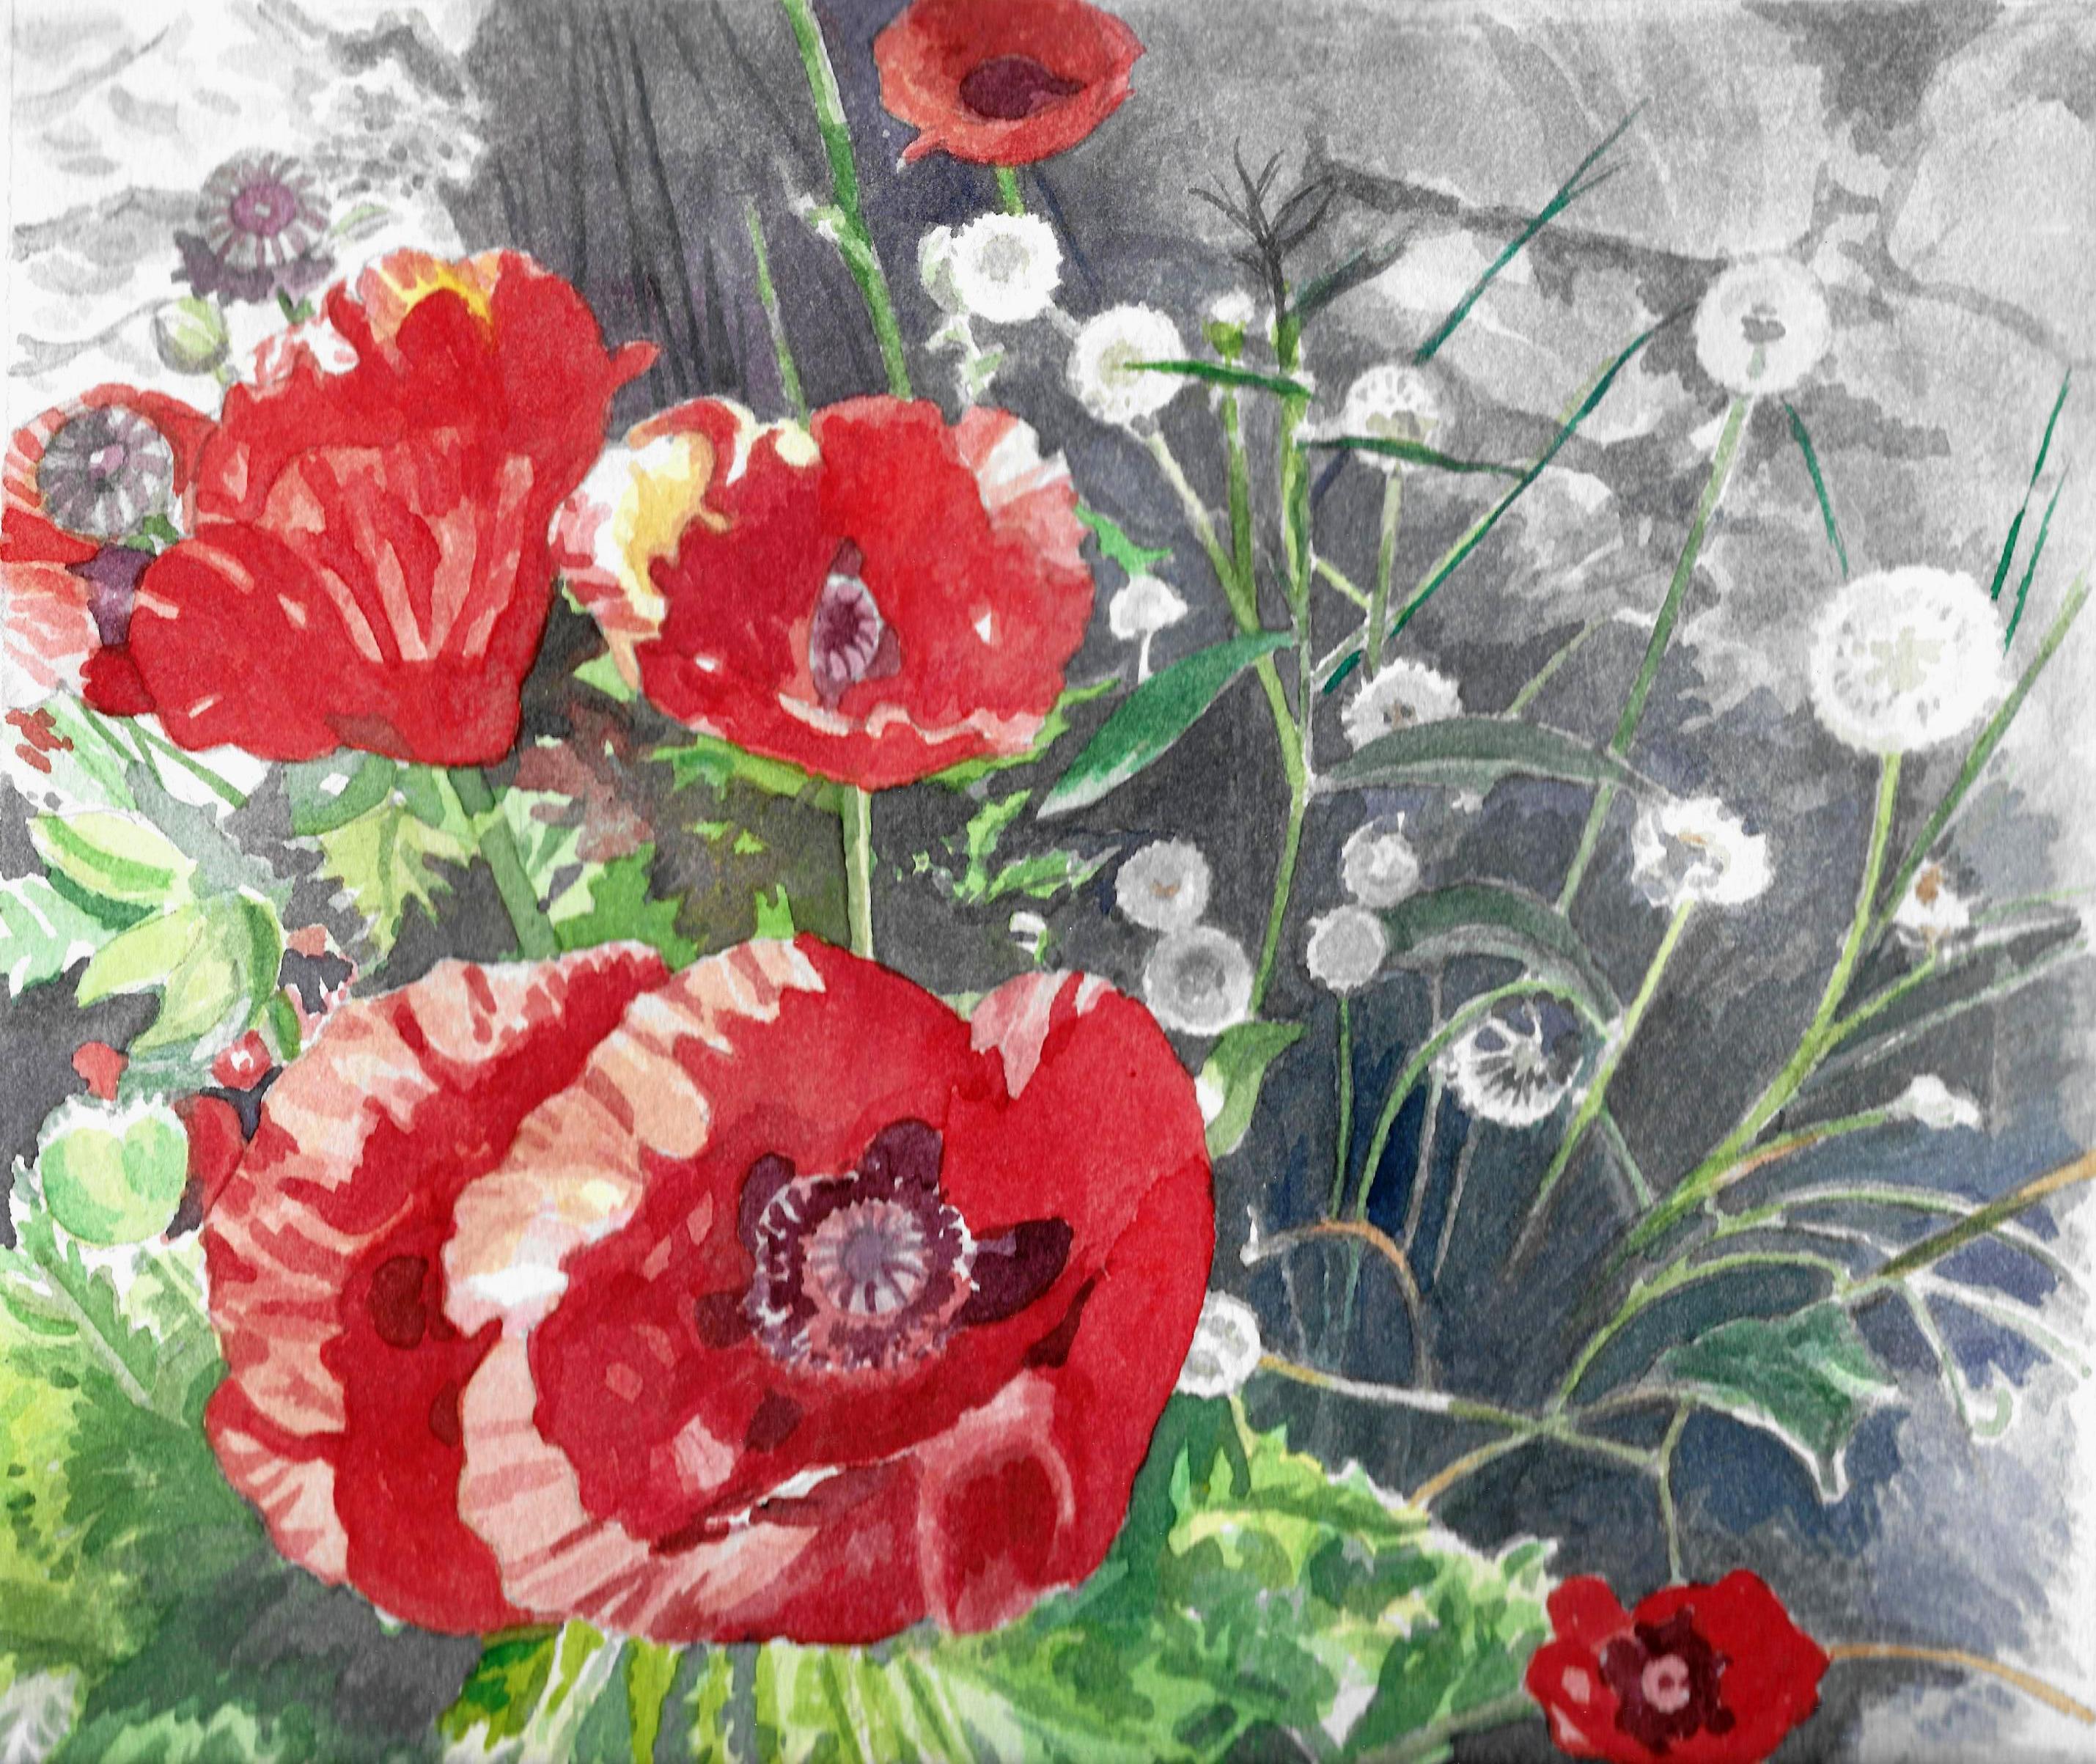 Poppies and Dandelions I